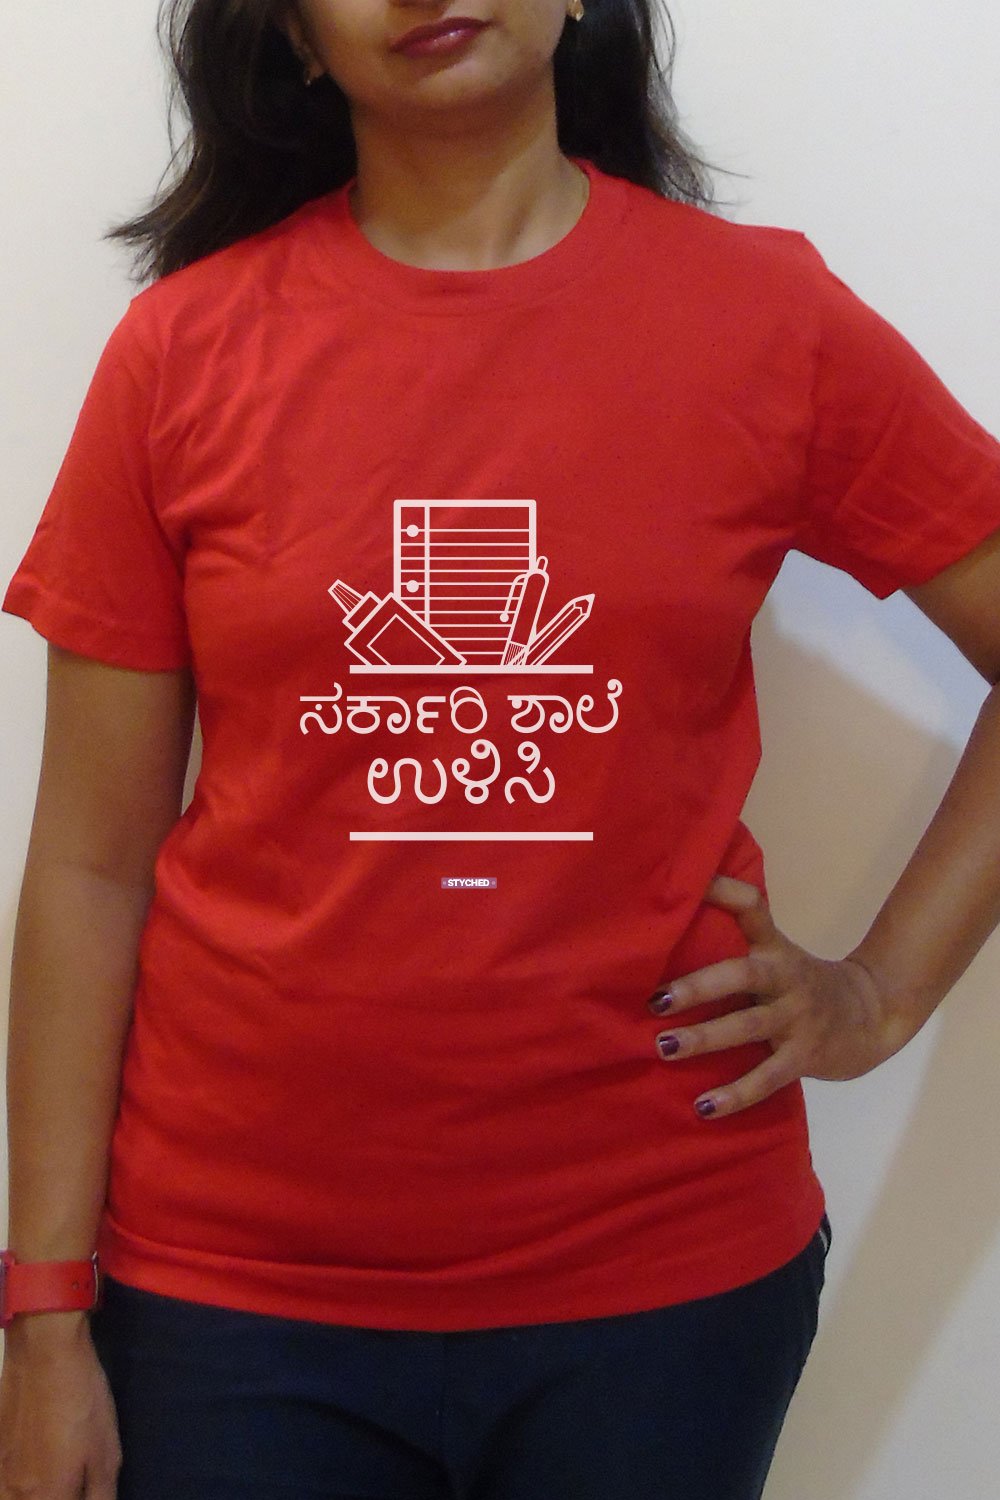 Save Govt. Schools Movement Tee - Styched In India Graphic T-Shirt Red